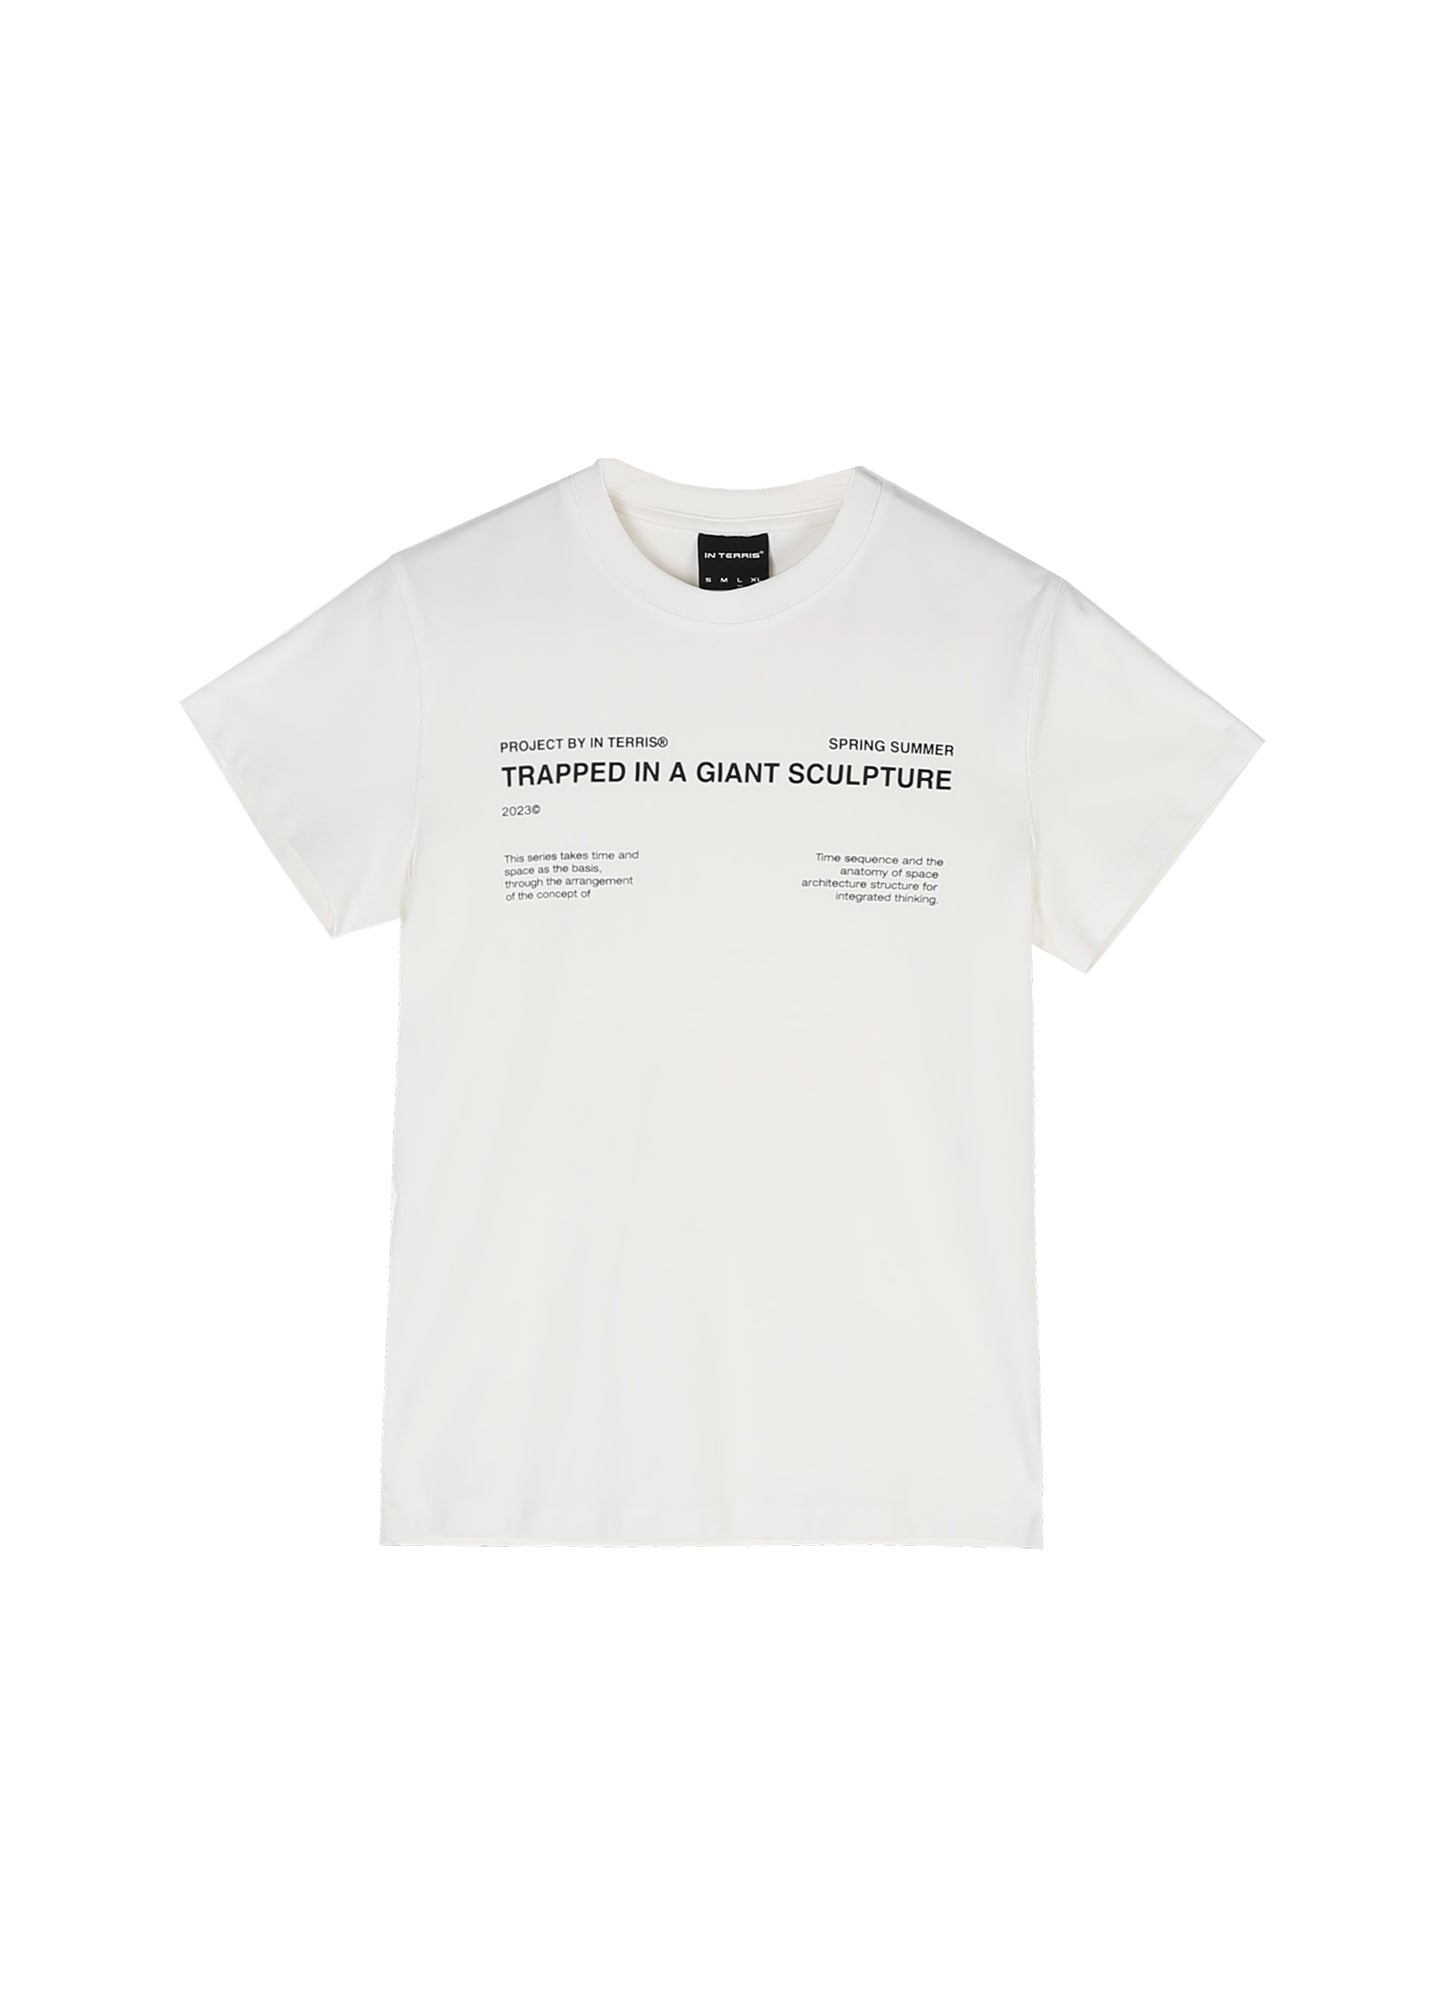 Trapped Campaign Tee